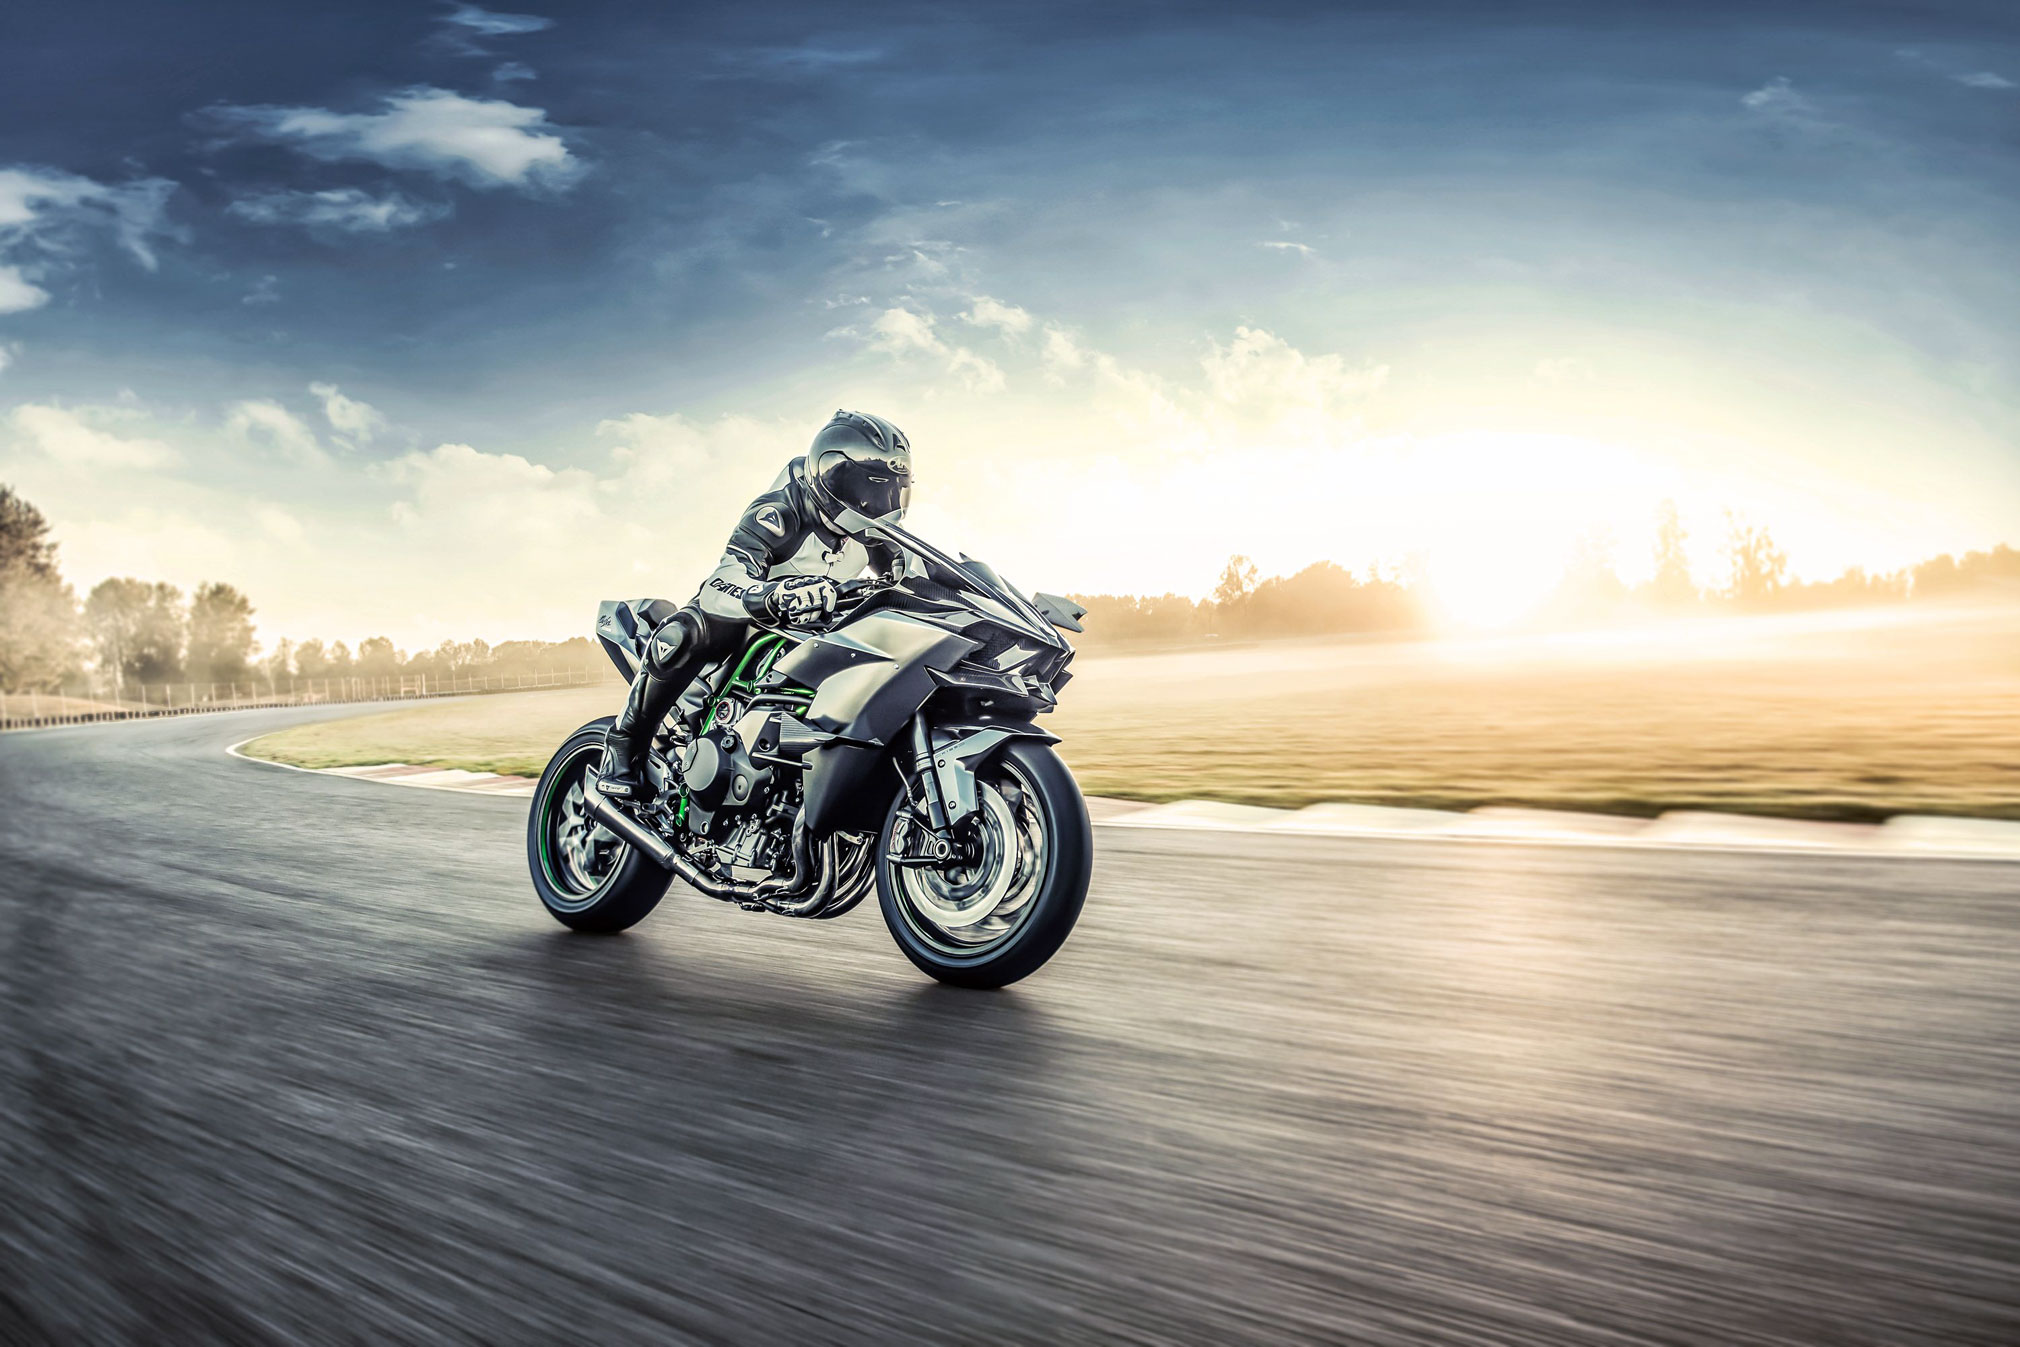 Kawasaki Will Spin off Its Motorcycle & Engine Businesses Next Year